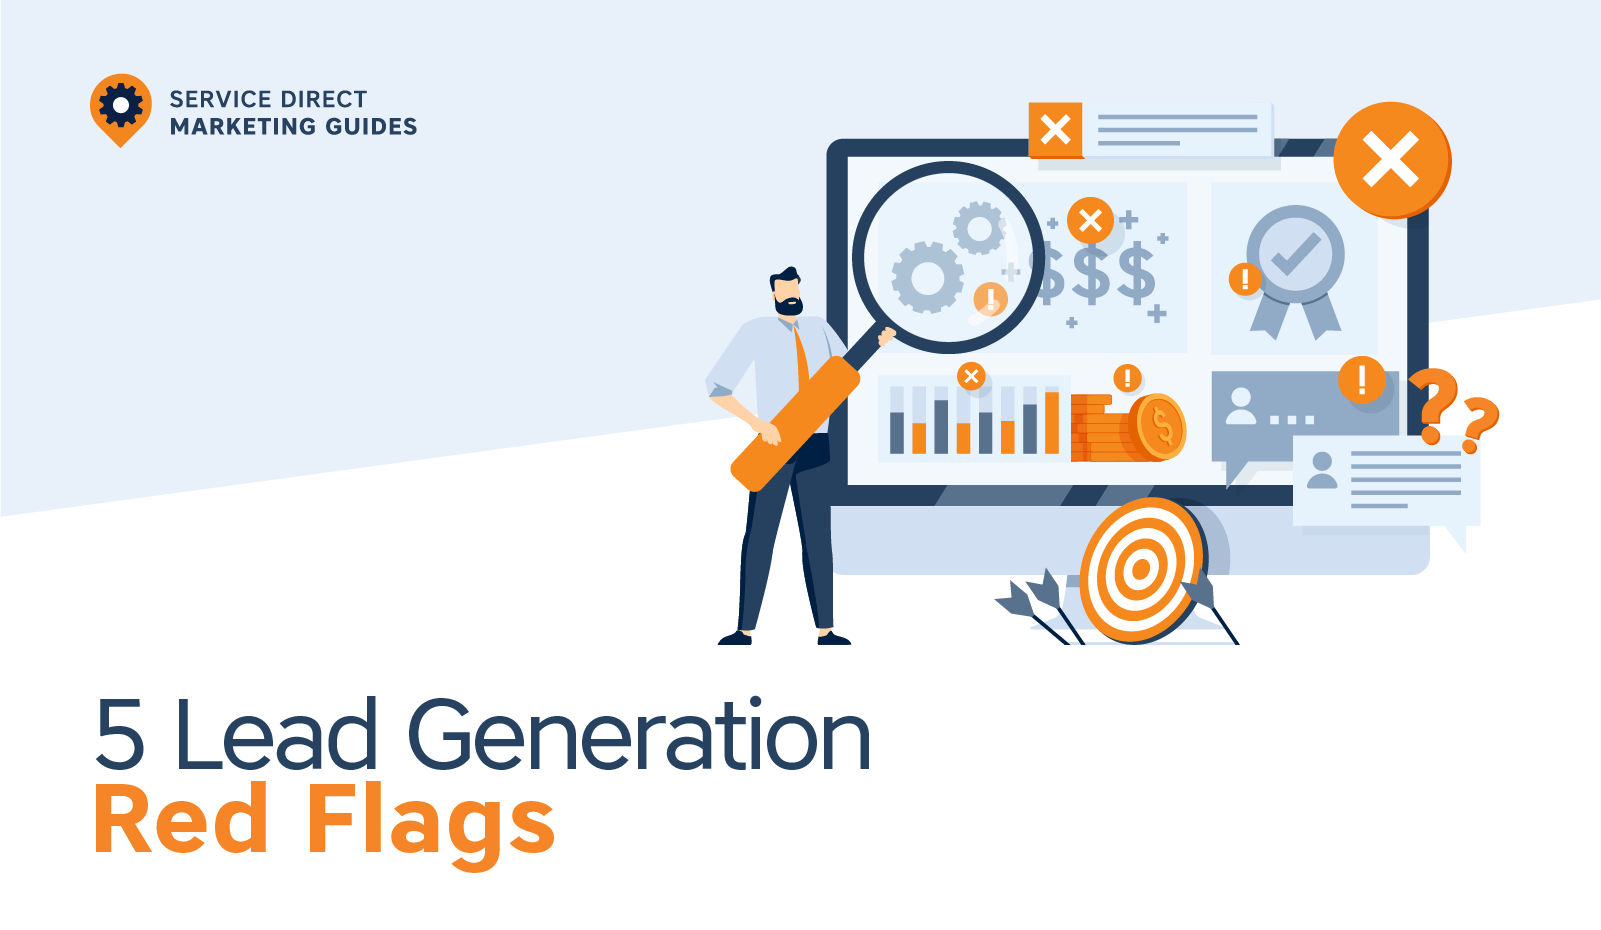 5 Lead Generation Red Flags to Watch Out For